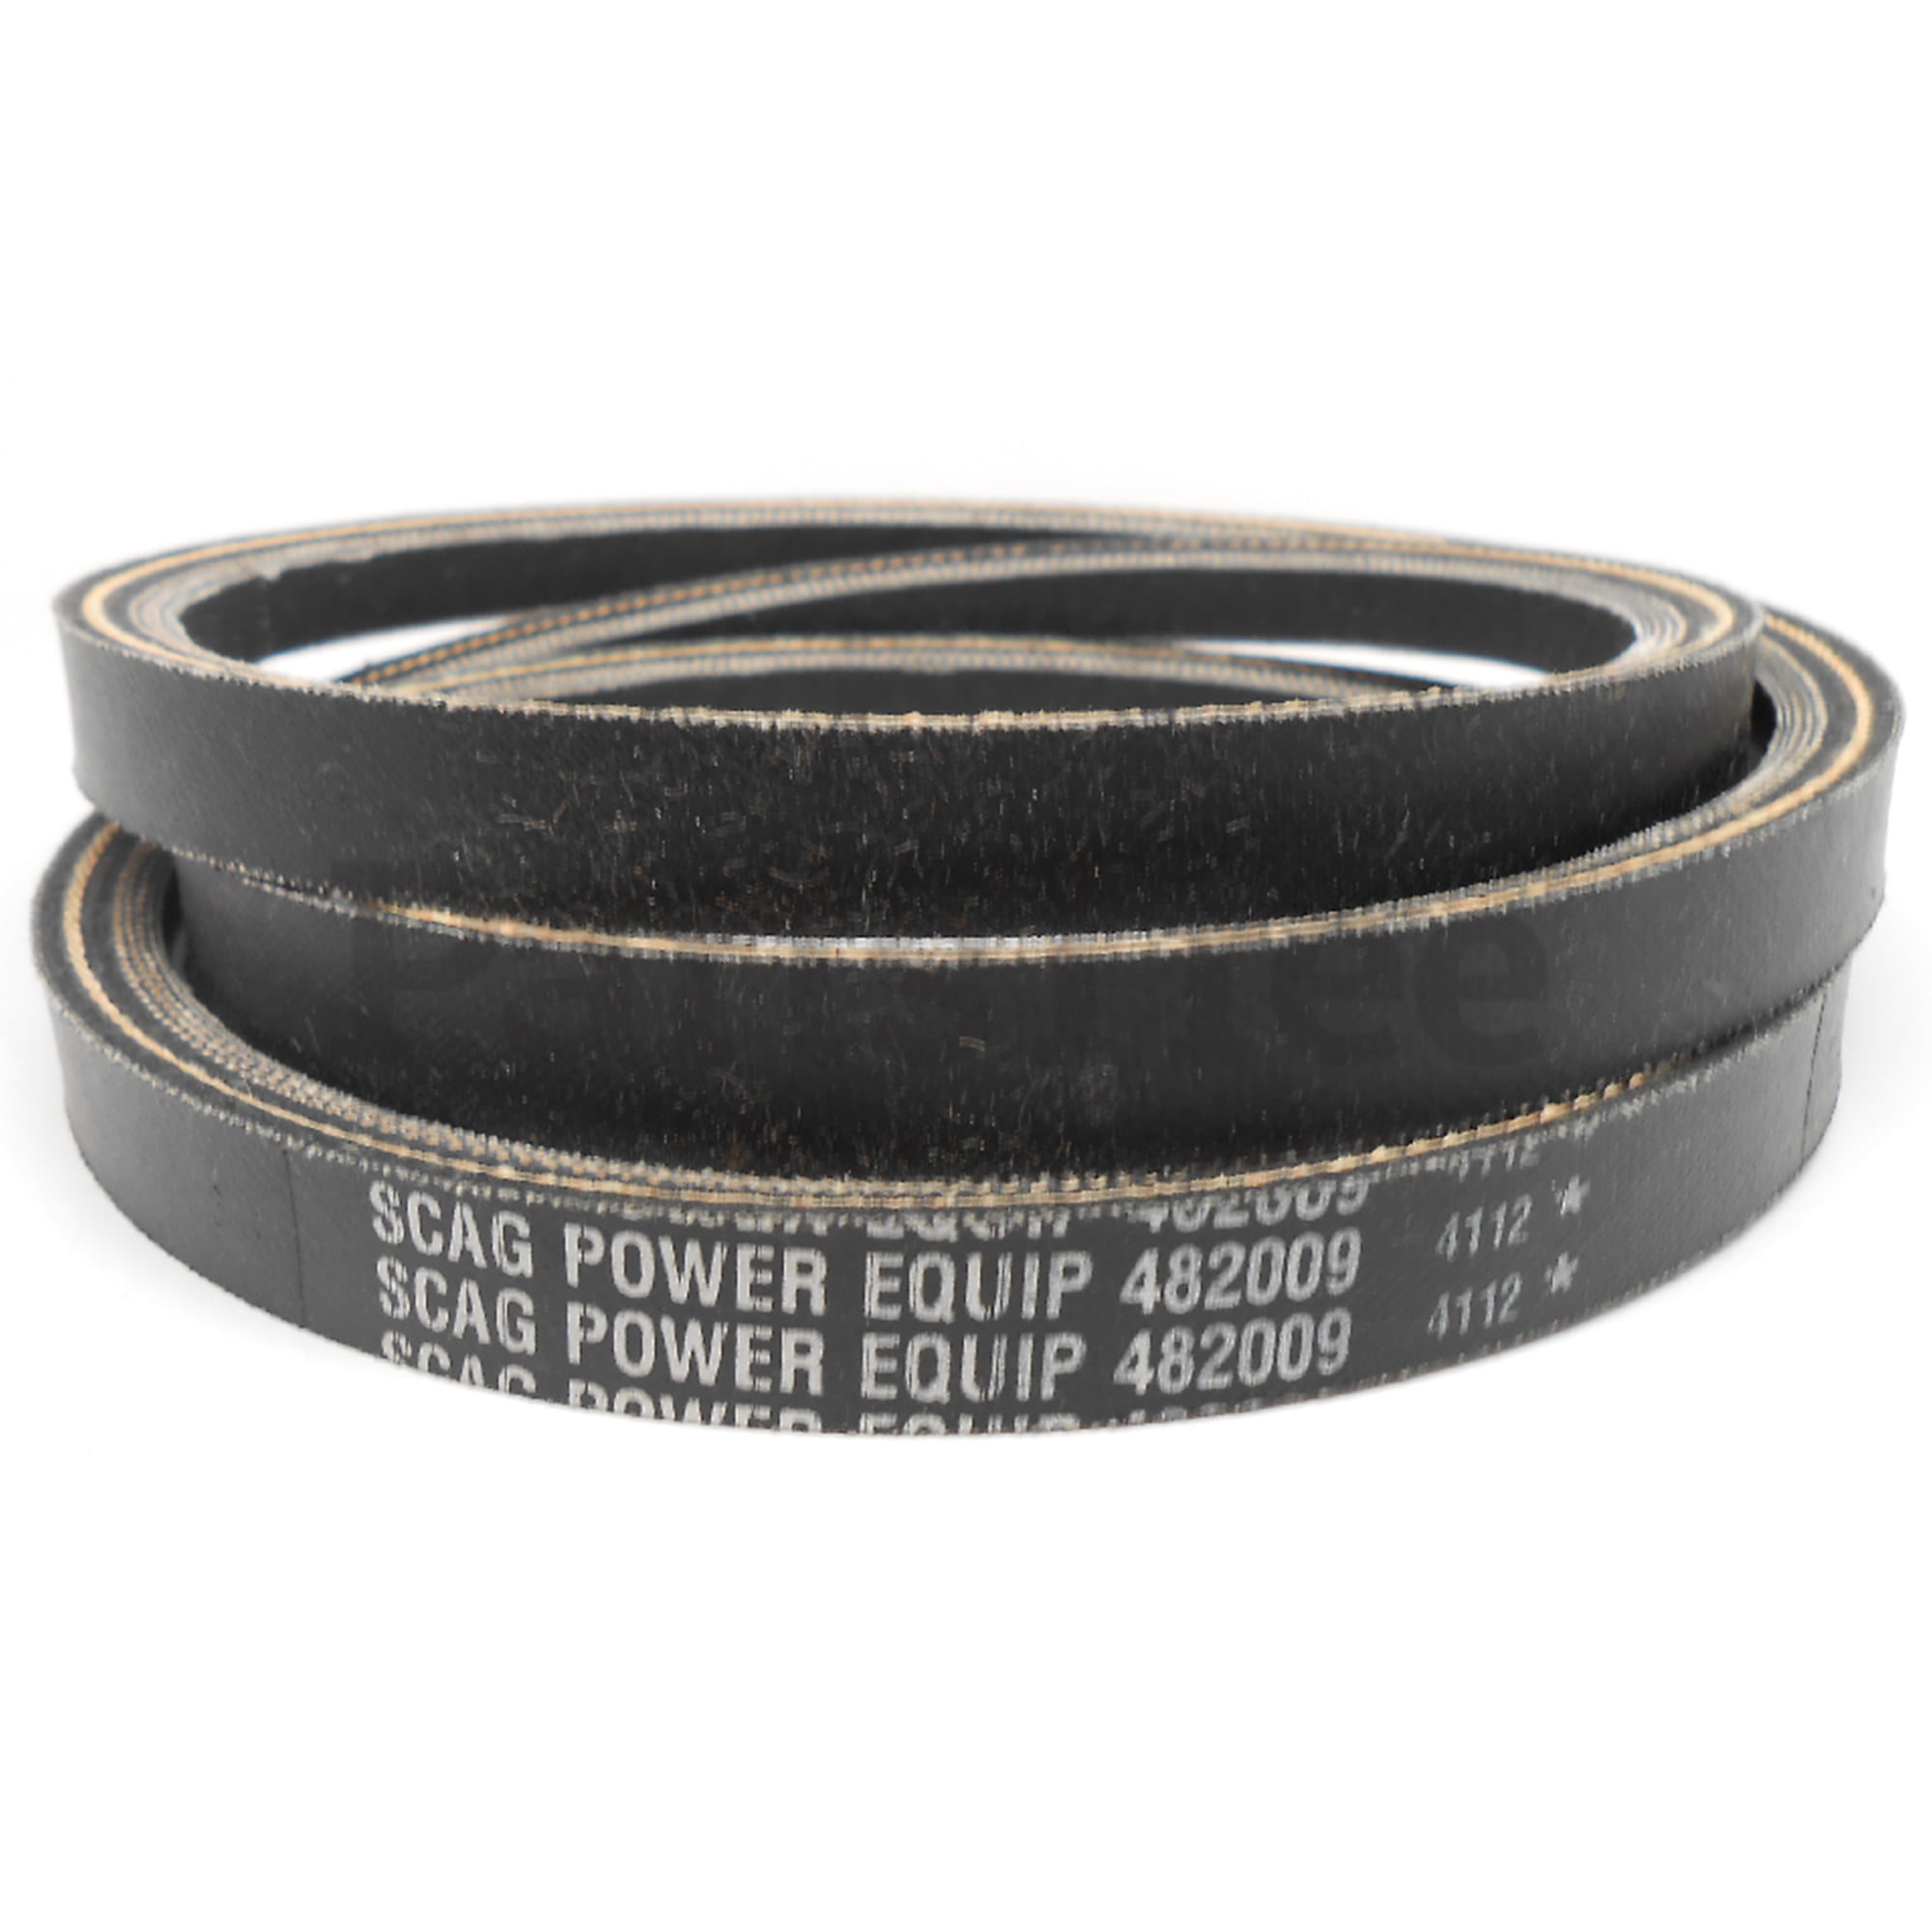 SCAG POWER EQUIPMENT 482009 made with Kevlar Replacement Belt 